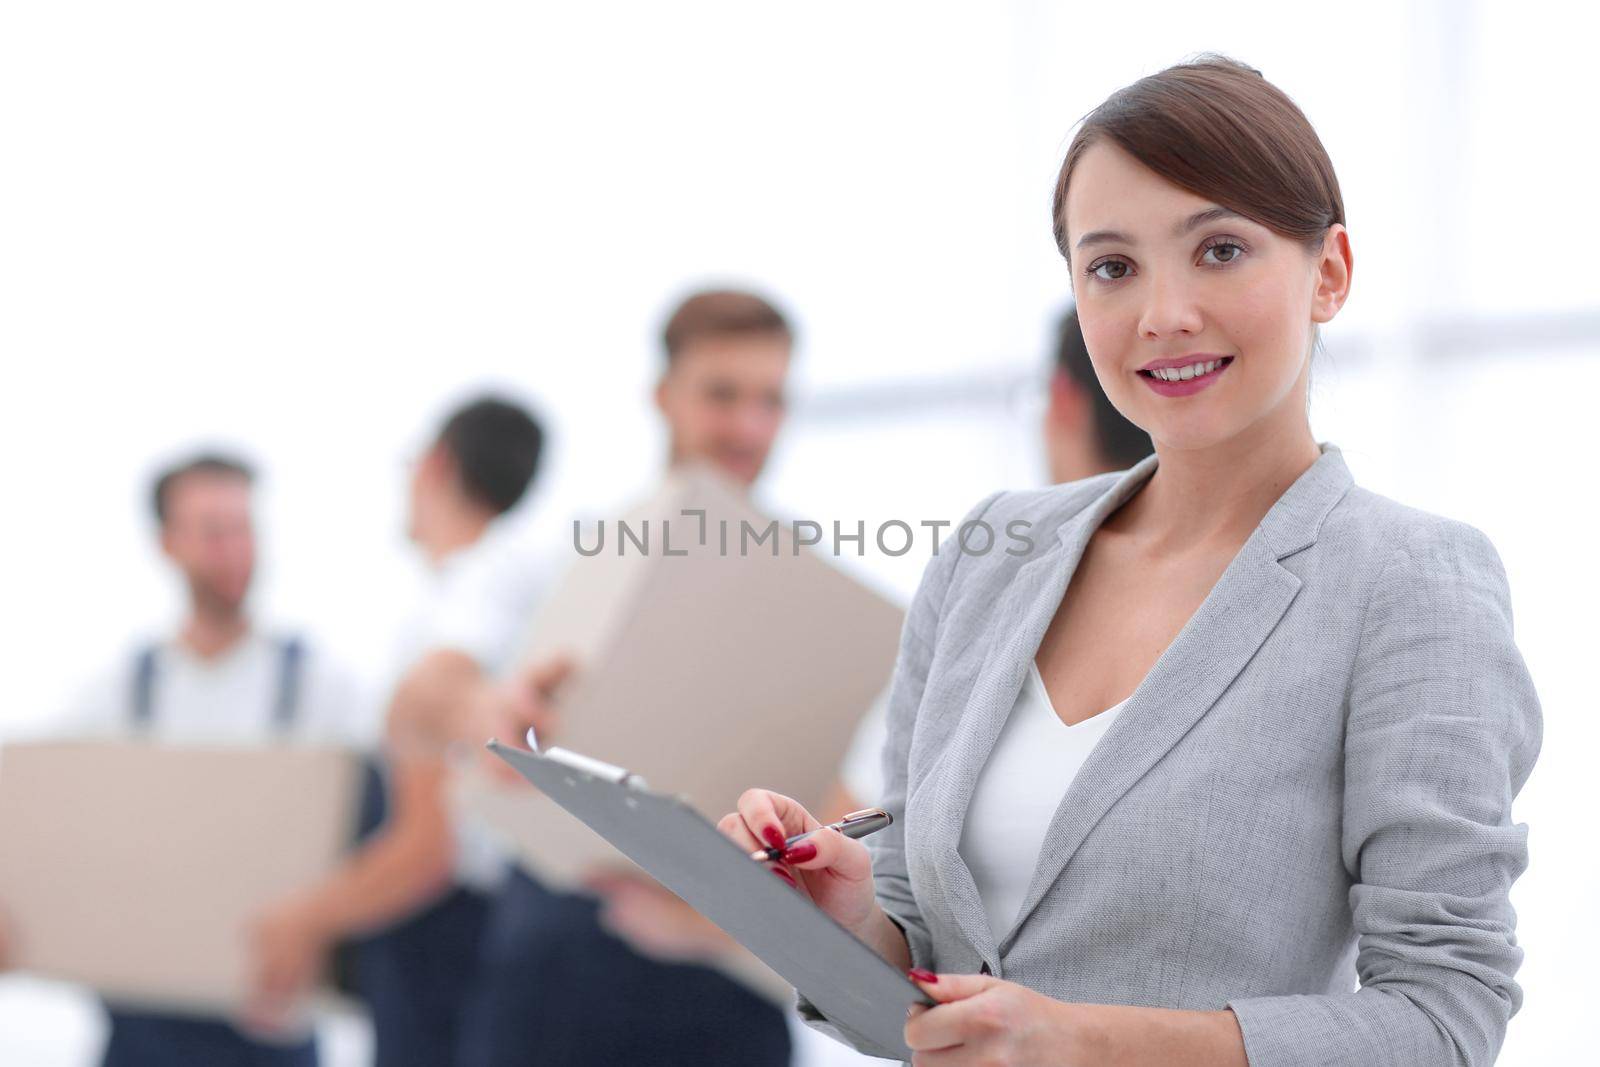 Woman manager holding clipboard on blurred background with movers and boxes.